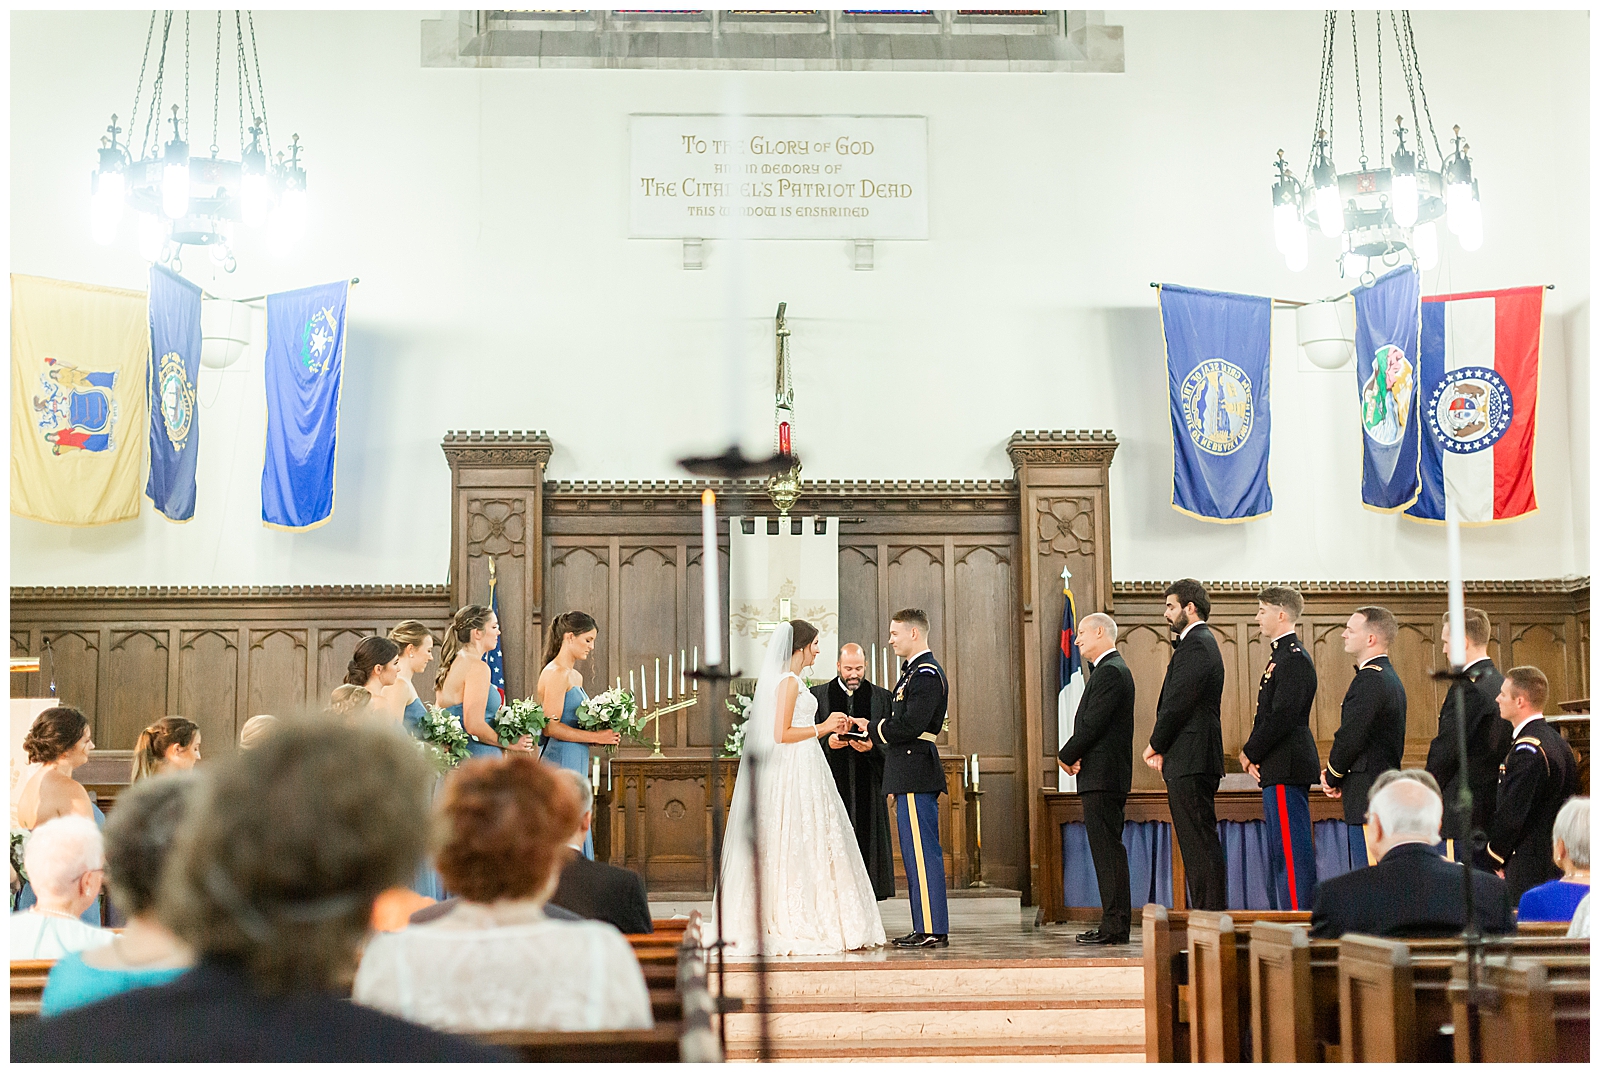 Exchanging Rings at Summerall Chapel